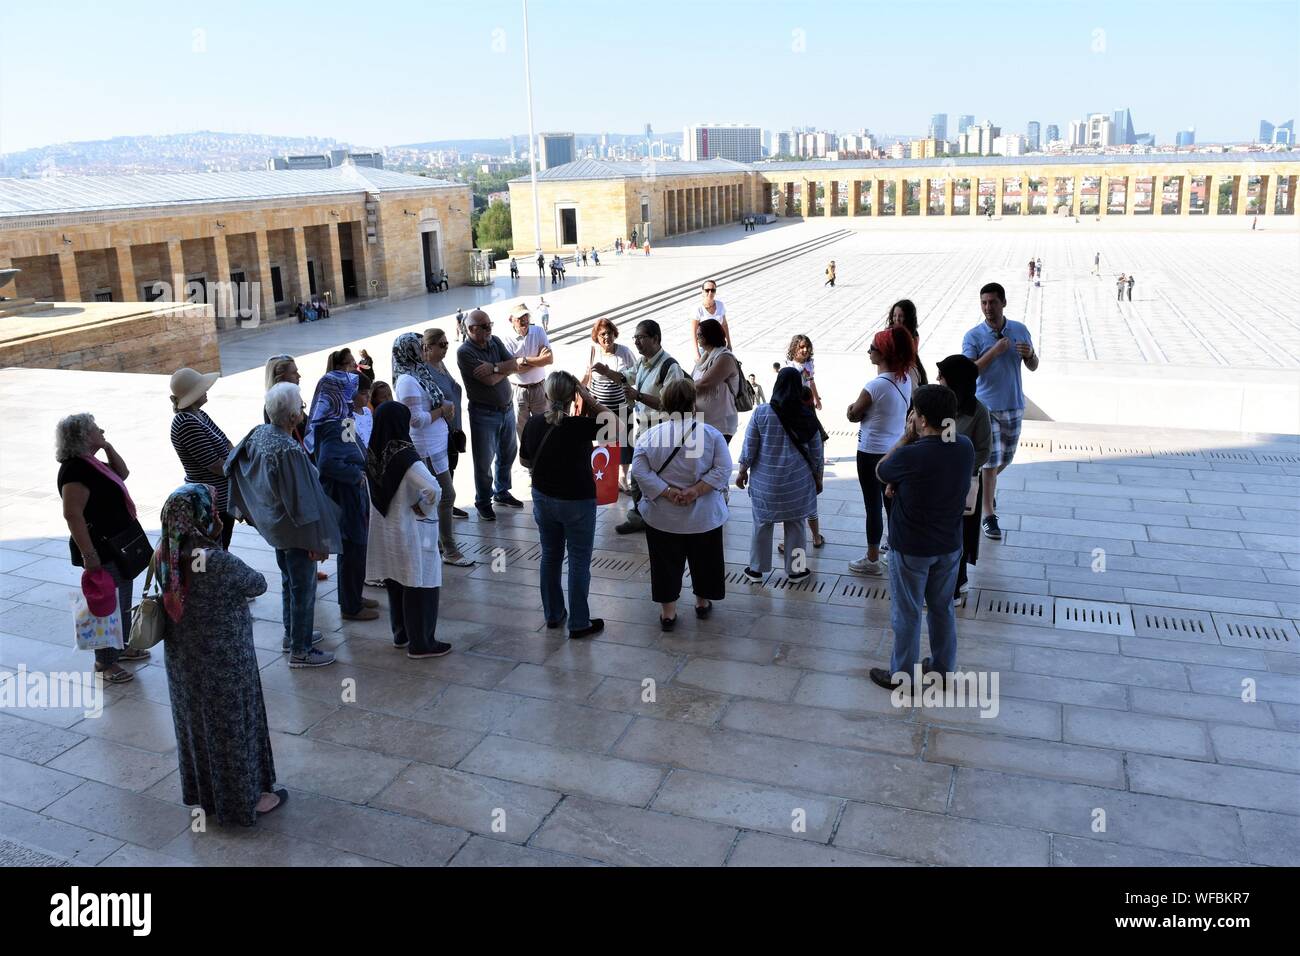 Ankara, Turkey. 31st Aug, 2019. A group of visitors listen to their tour guide at Anitkabir, the mausoleum of modern Turkey's founder Mustafa Kemal Ataturk, a day after the 97th anniversary of Victory Day, which commemorates the defeat of the Greek forces at the hands of the Turks in the Battle of Dumlupinar in 1922. Credit: Altan Gocher/ZUMA Wire/Alamy Live News Stock Photo